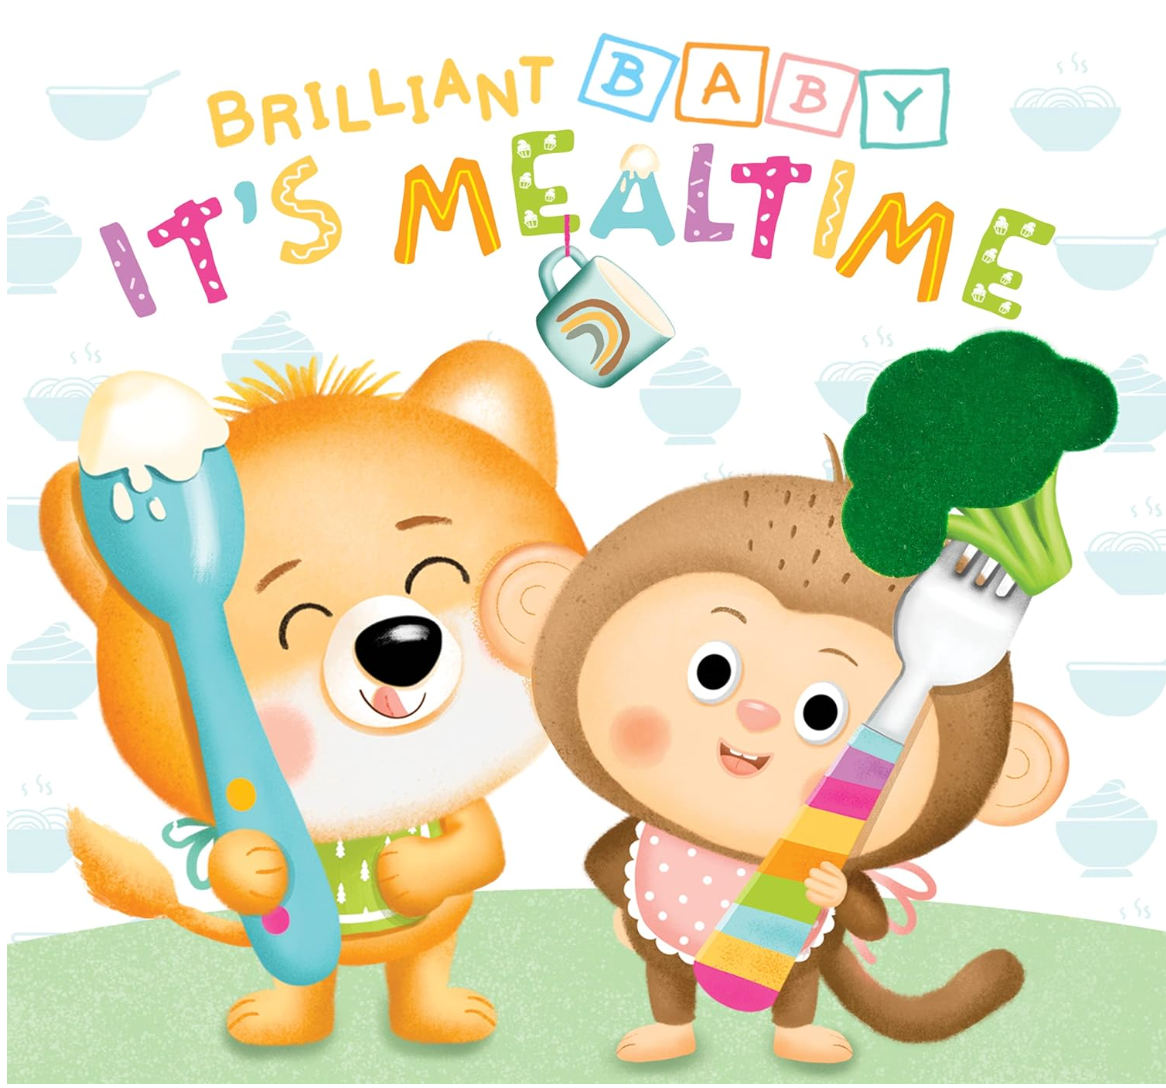 Little Hippo Books Brilliant Baby: It's Mealtime - Children's Touch and Feel and Learn Sensory Board Book